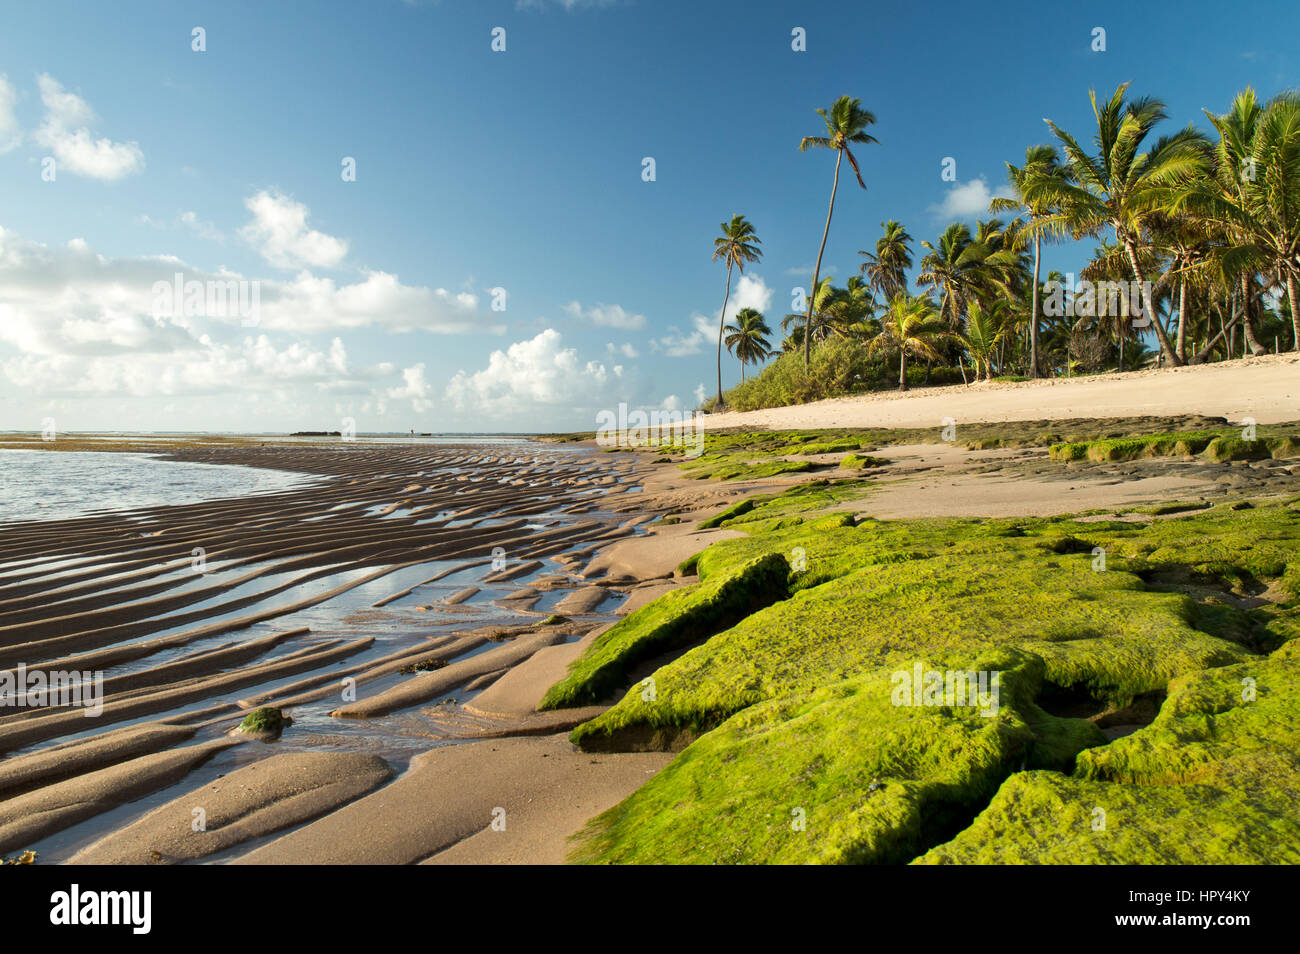 Lord's Beach. Bahia, Brazil. This image shows moss on rocks in the foreground and rippled sand. Coconut trees and a beautiful light at the sunrise. Stock Photo